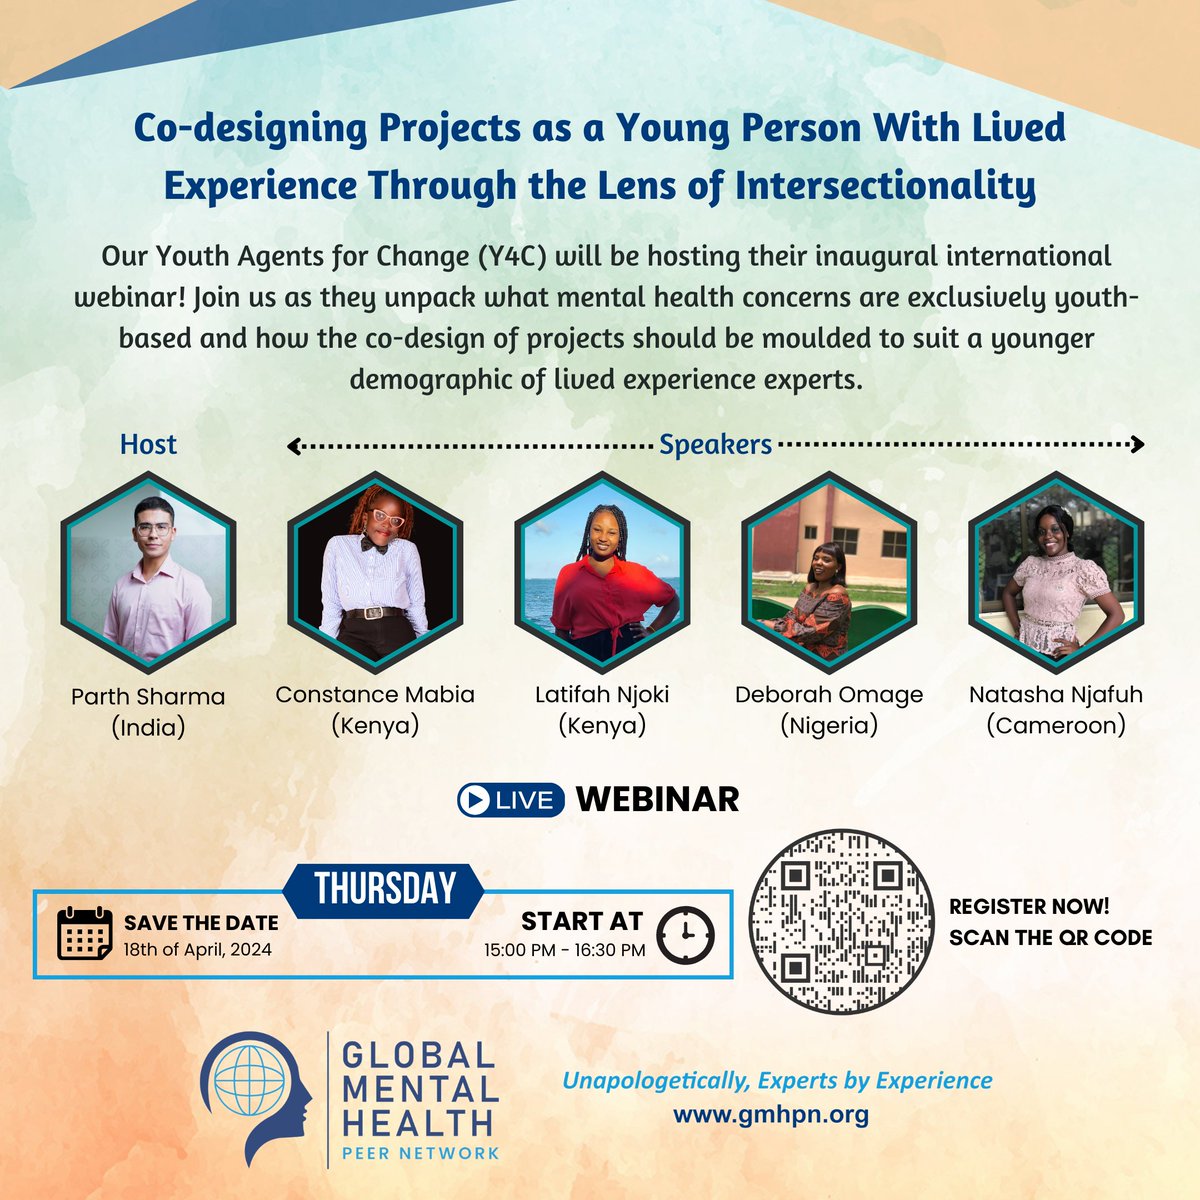 Exciting news! Our Youth Agents for Change Unit (Y4C) is hosting their first webinar this month! Join us on April 18th, at 3 pm SAST, as we explore the importance of youth perspectives in mental health. Scan the QR code or Register for this event here: us06web.zoom.us/meeting/regist…